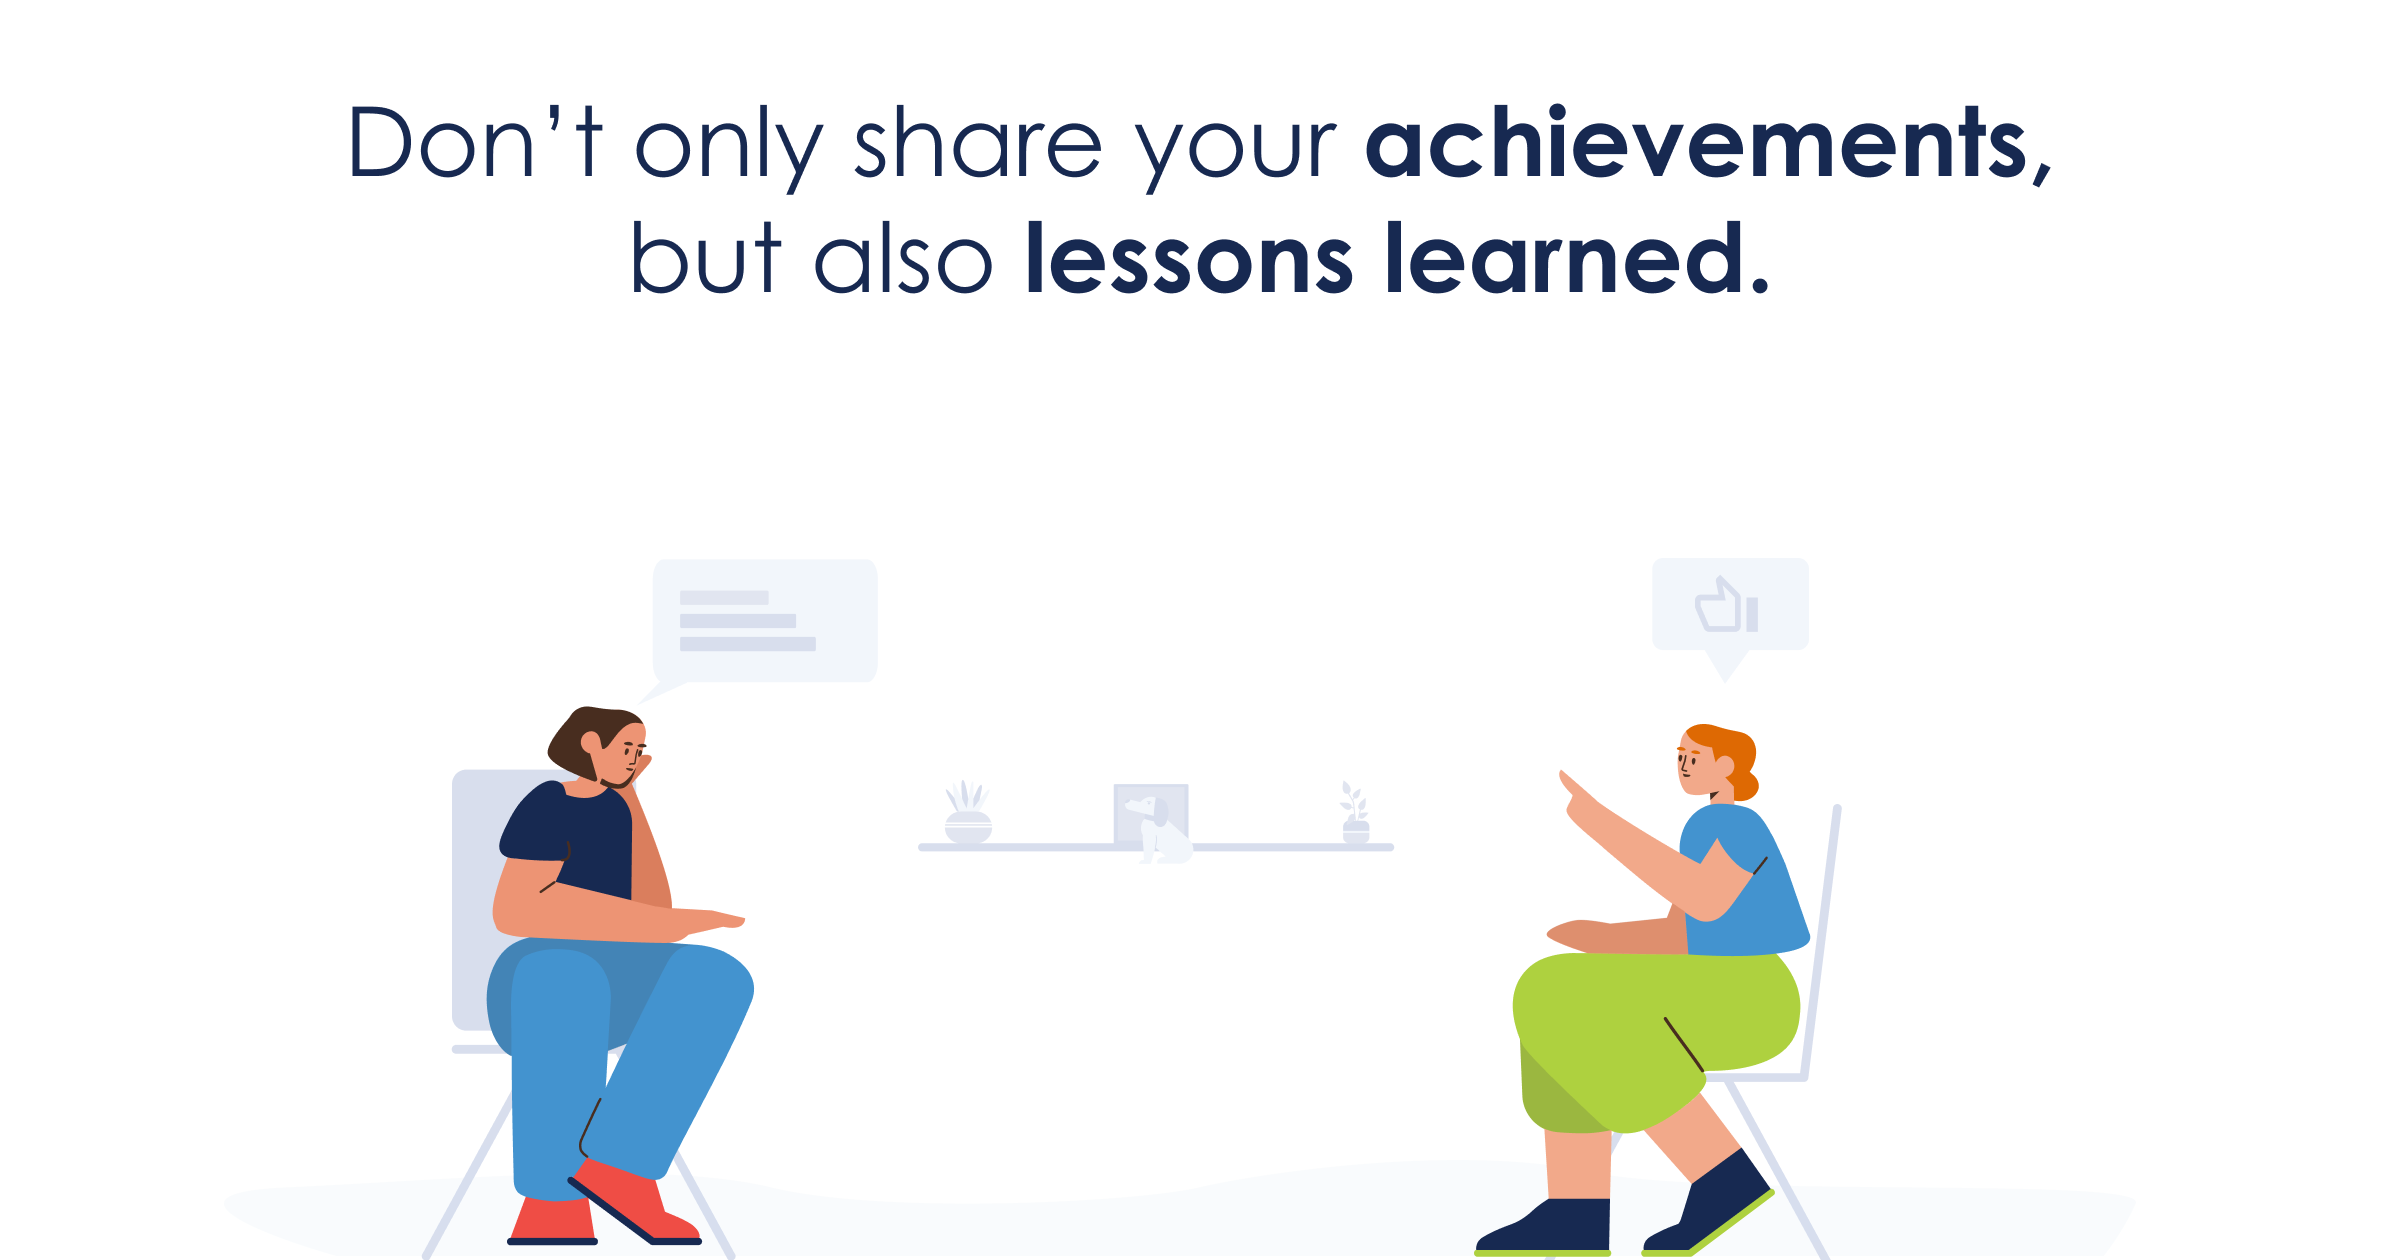 Don’t only share your achievements, but also lessons learned